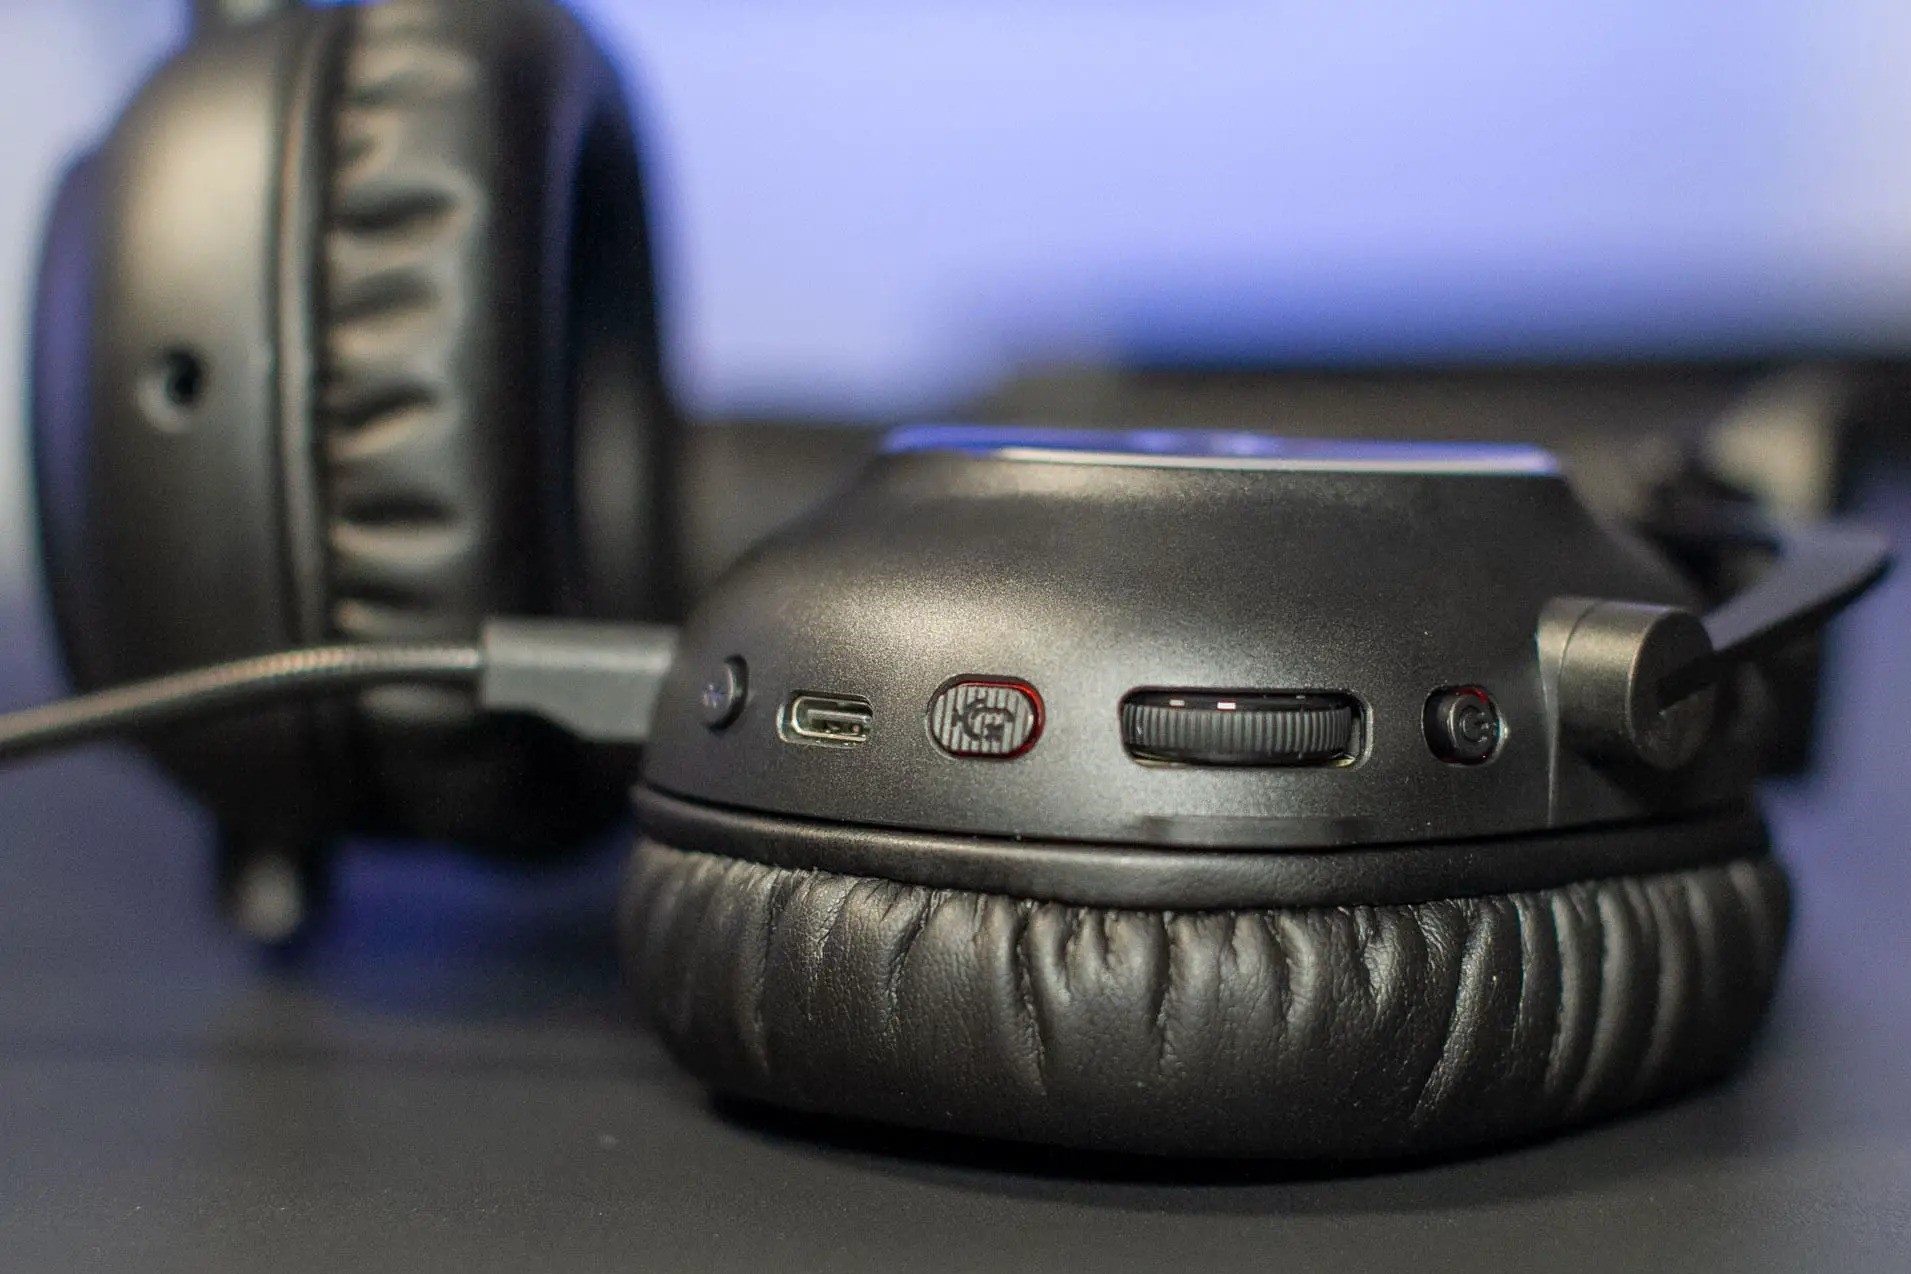 Pairing Your Logitech Headset: Easy-to-Follow Guide